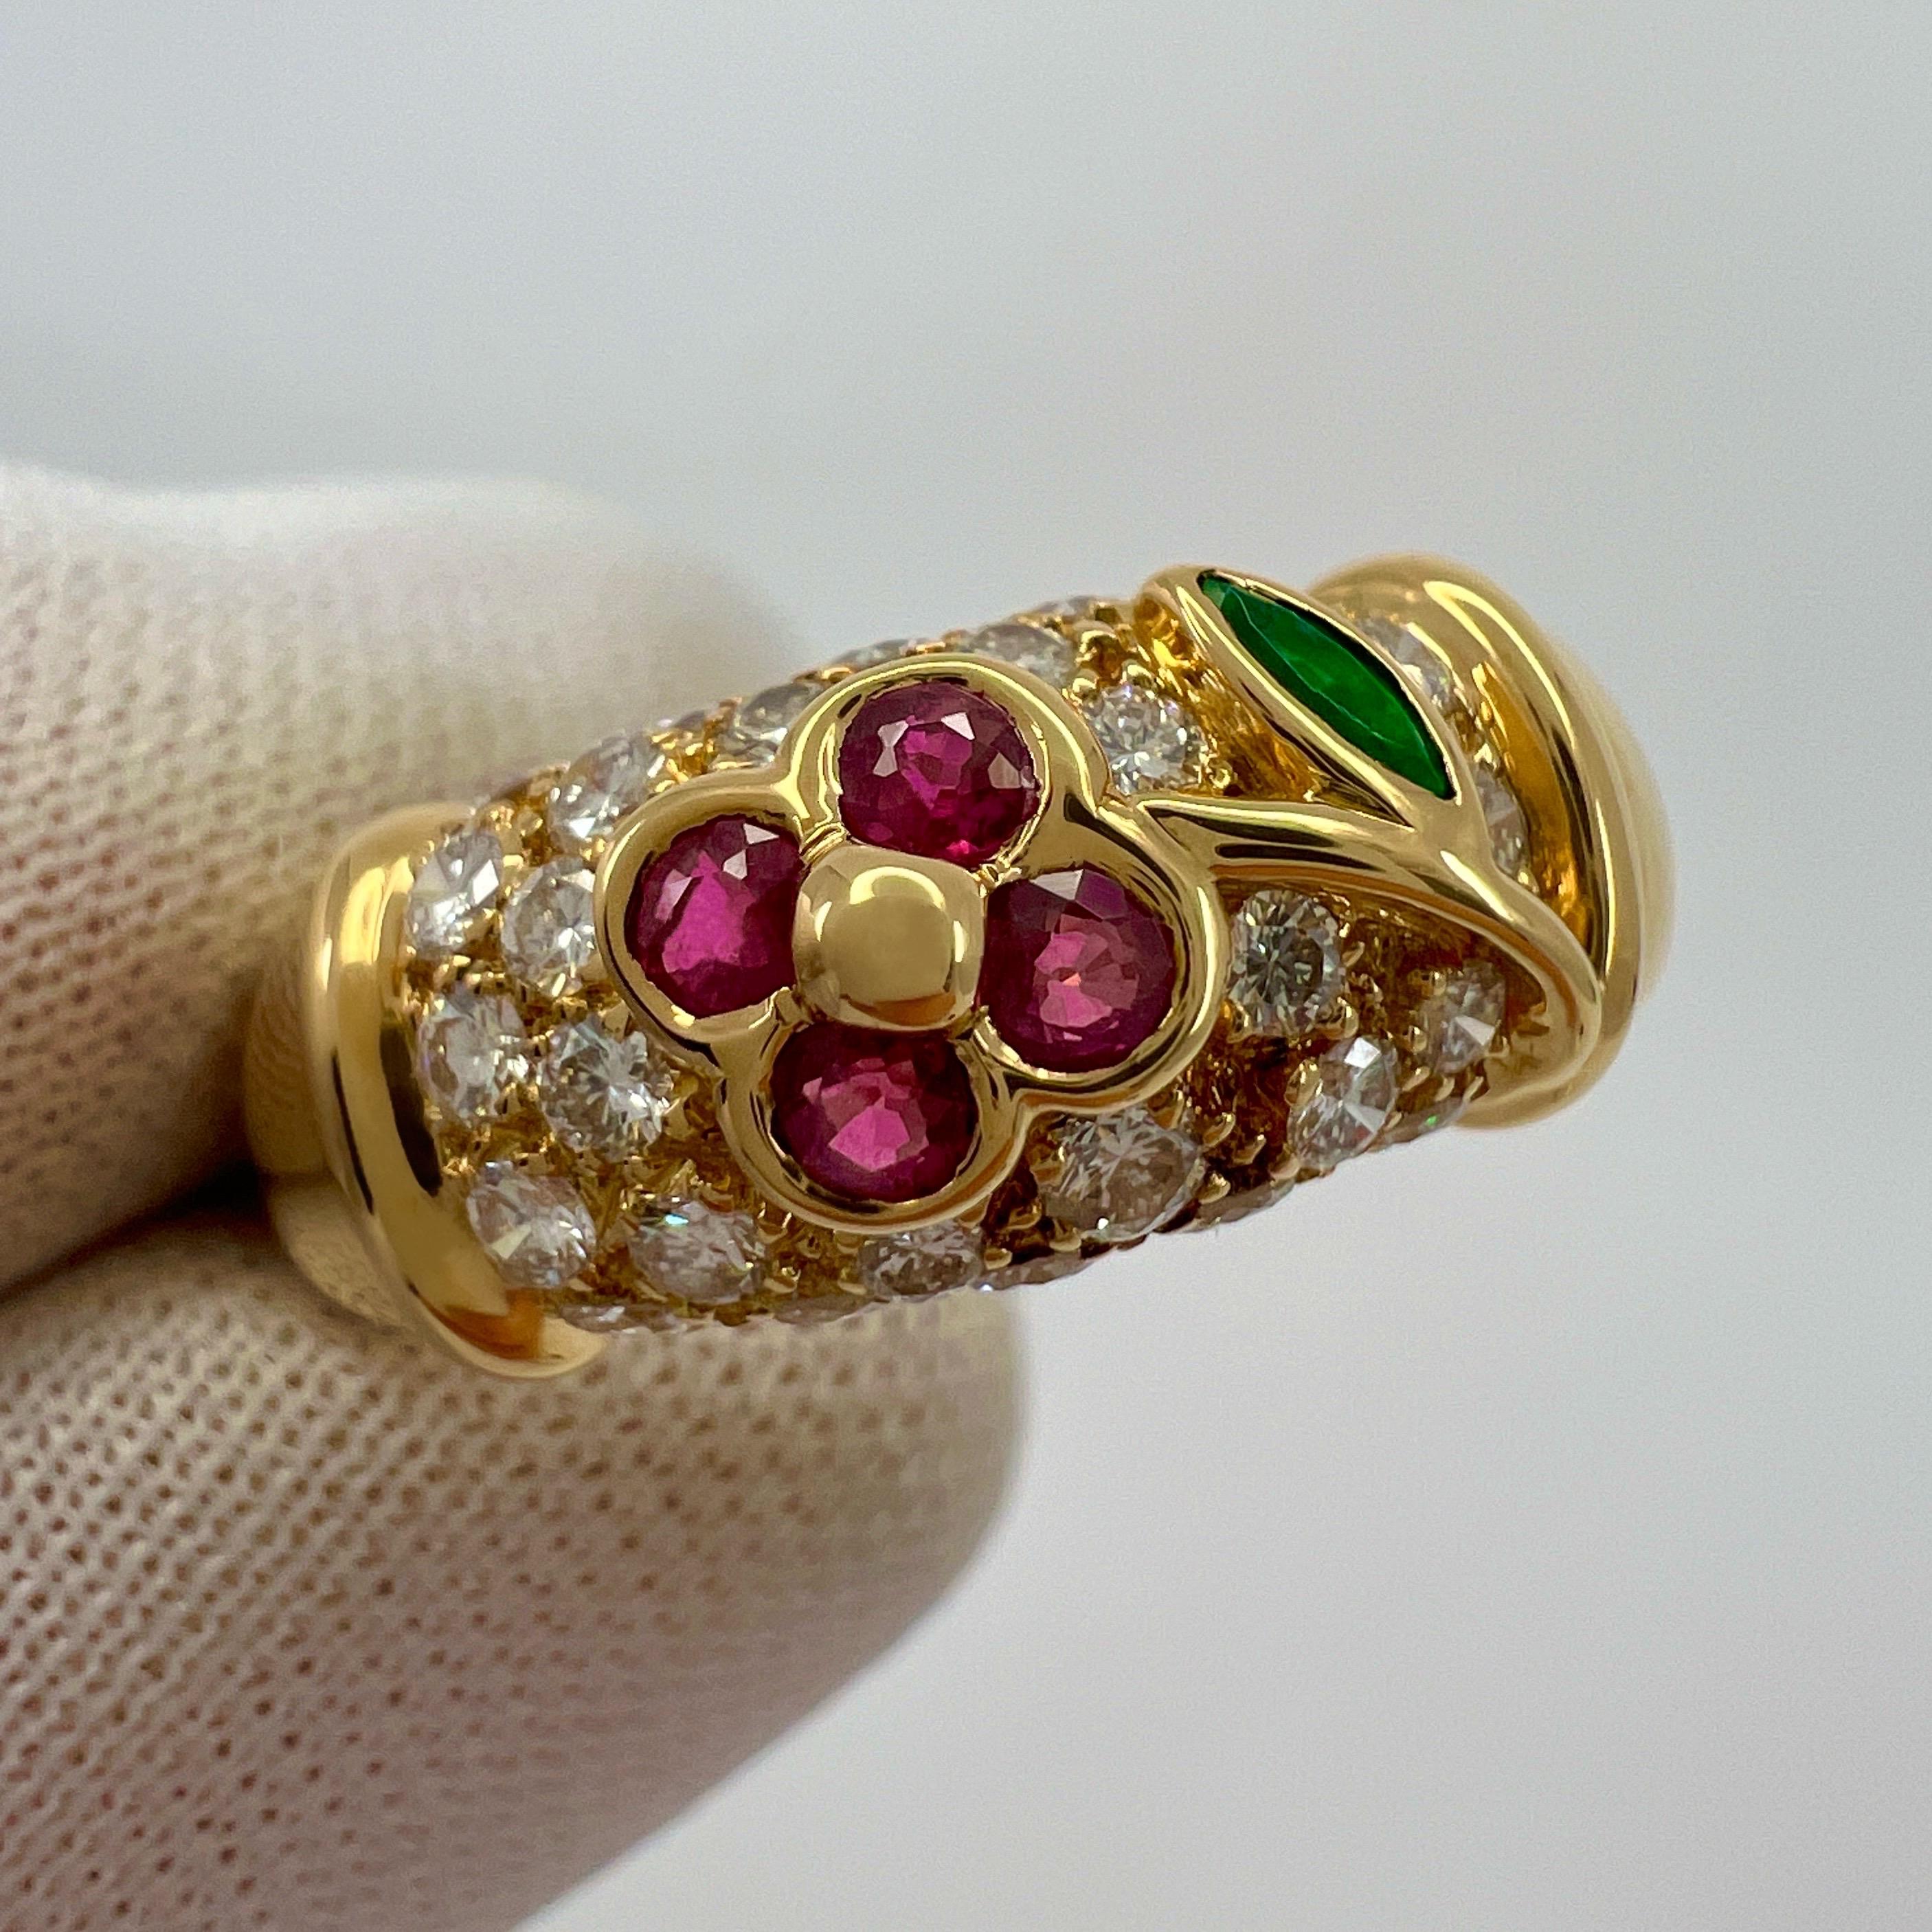 Rare Van Cleef & Arpels Ruby Emerald Diamond 18k Yellow Gold Floral Flower Ring For Sale 4